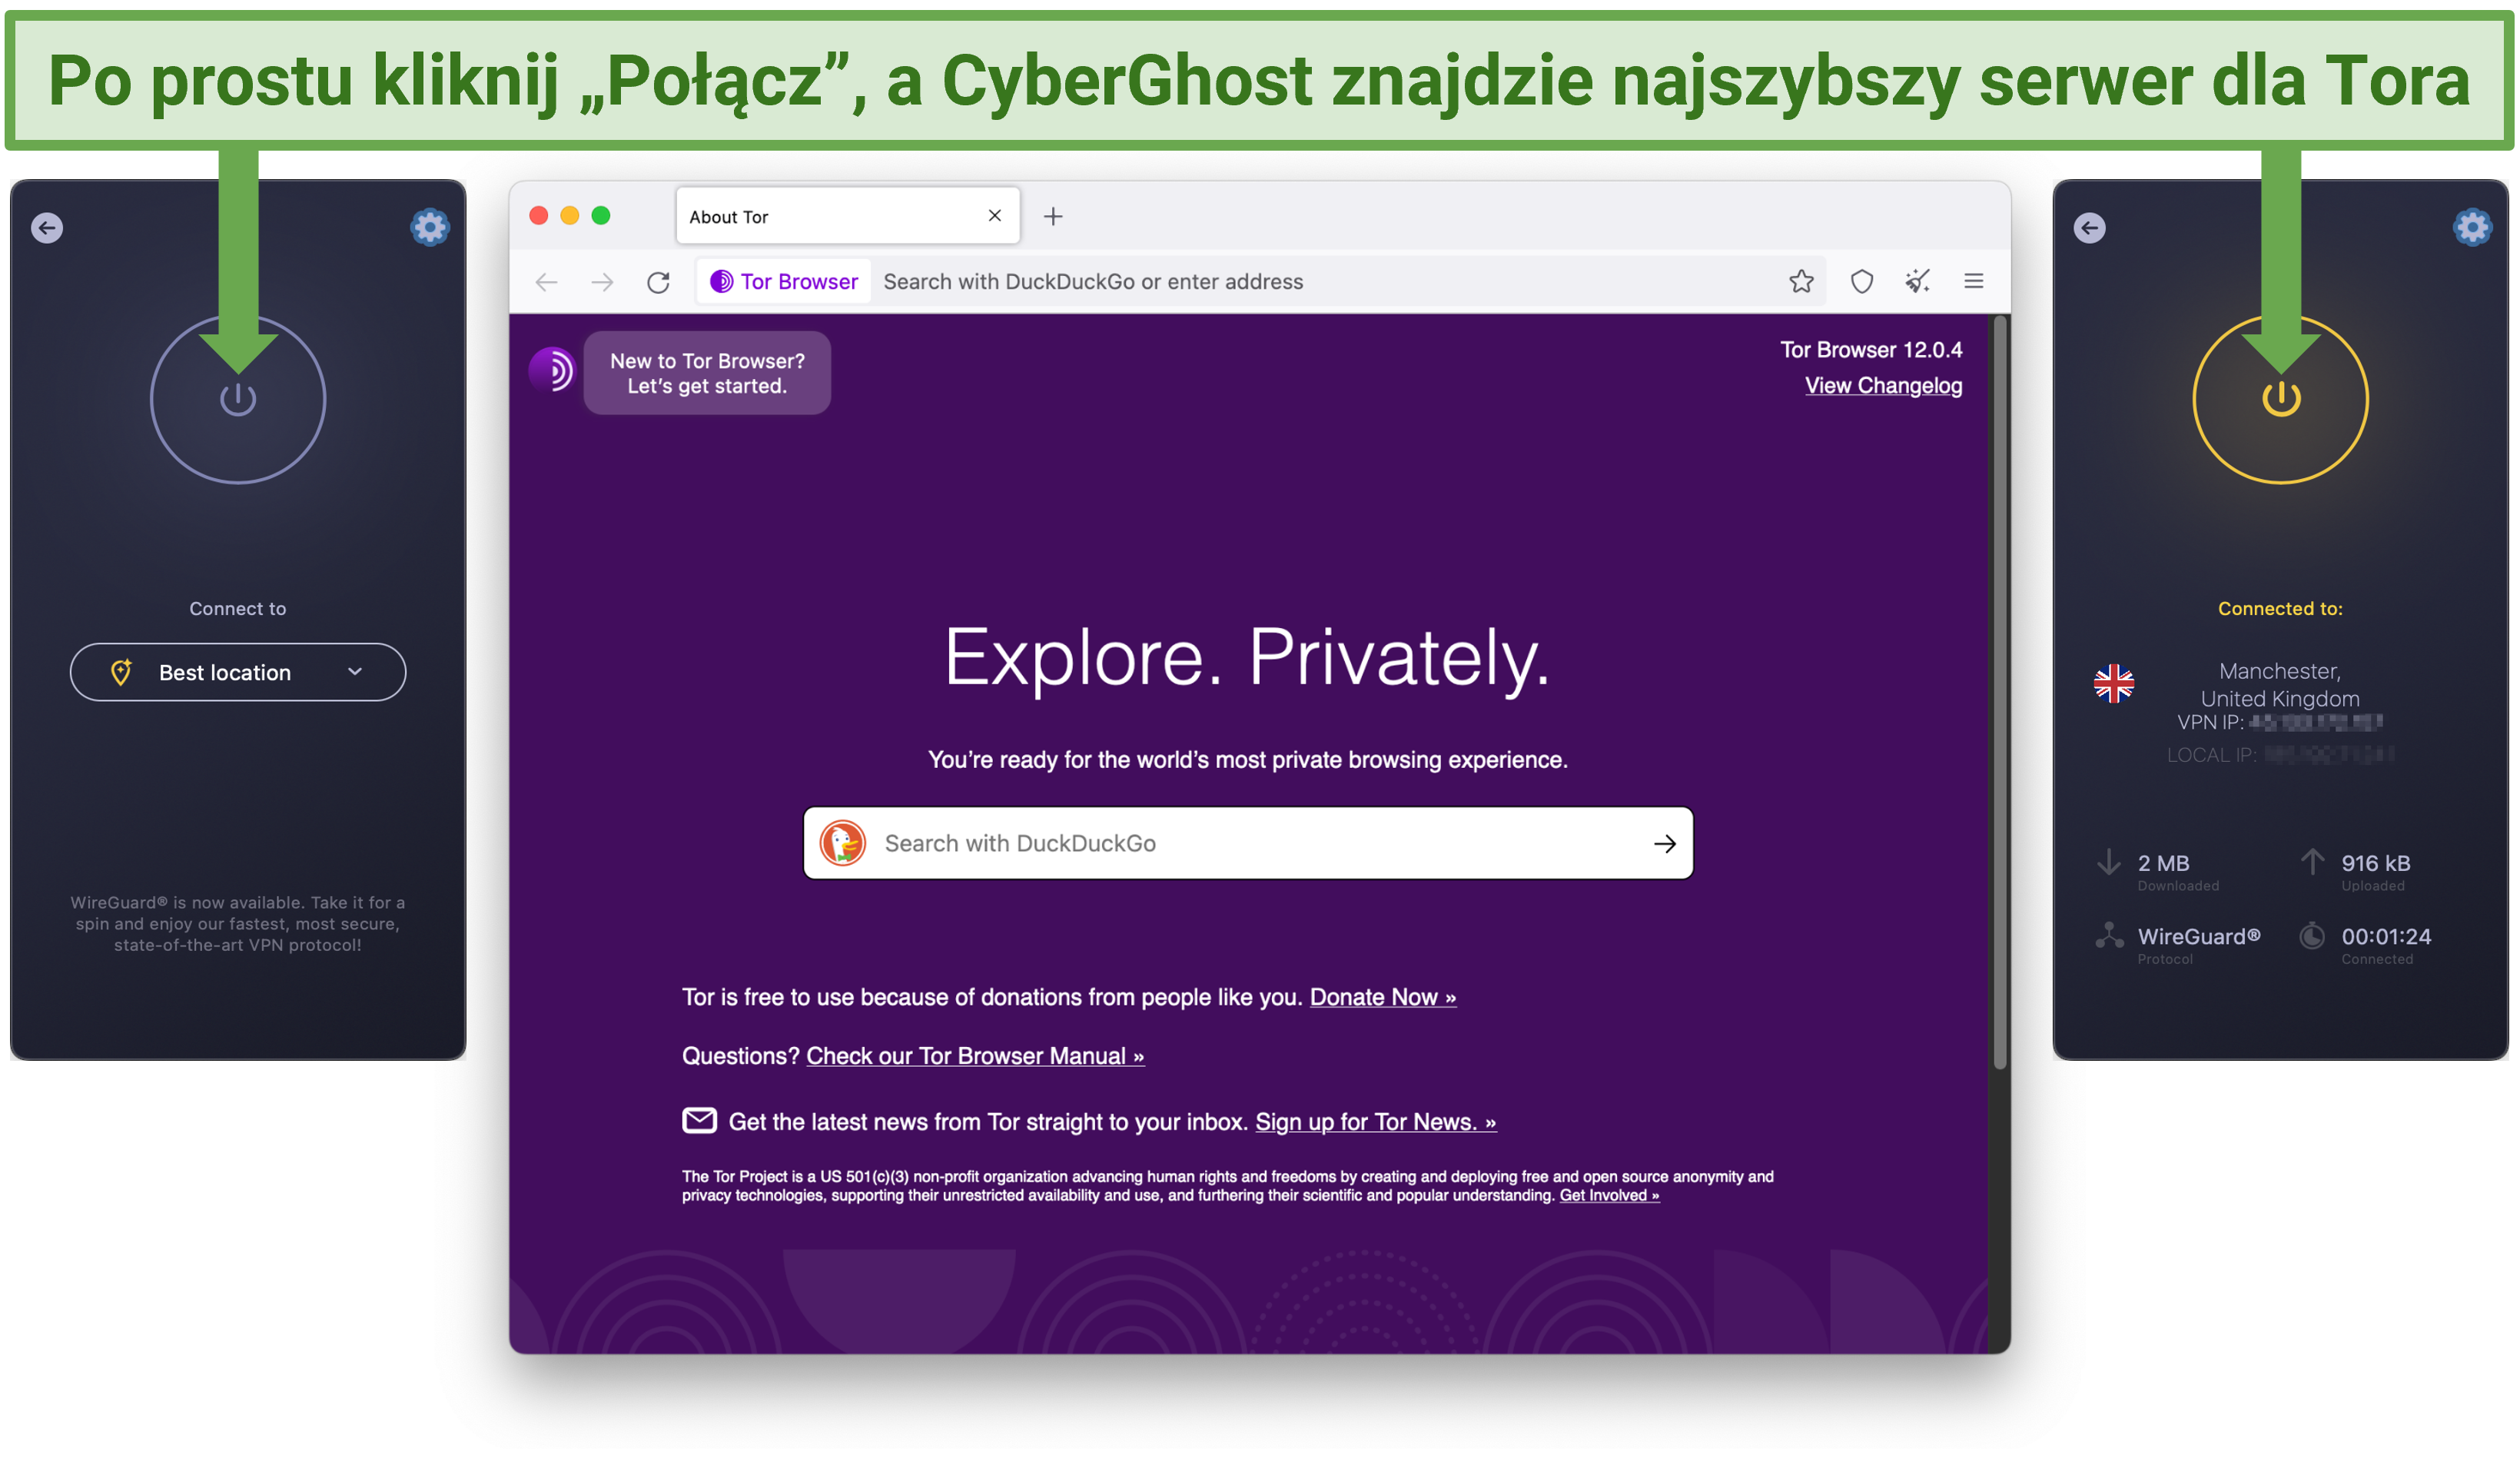 Screenshot showing how simple it is to connect to a server on the CyberGhost app